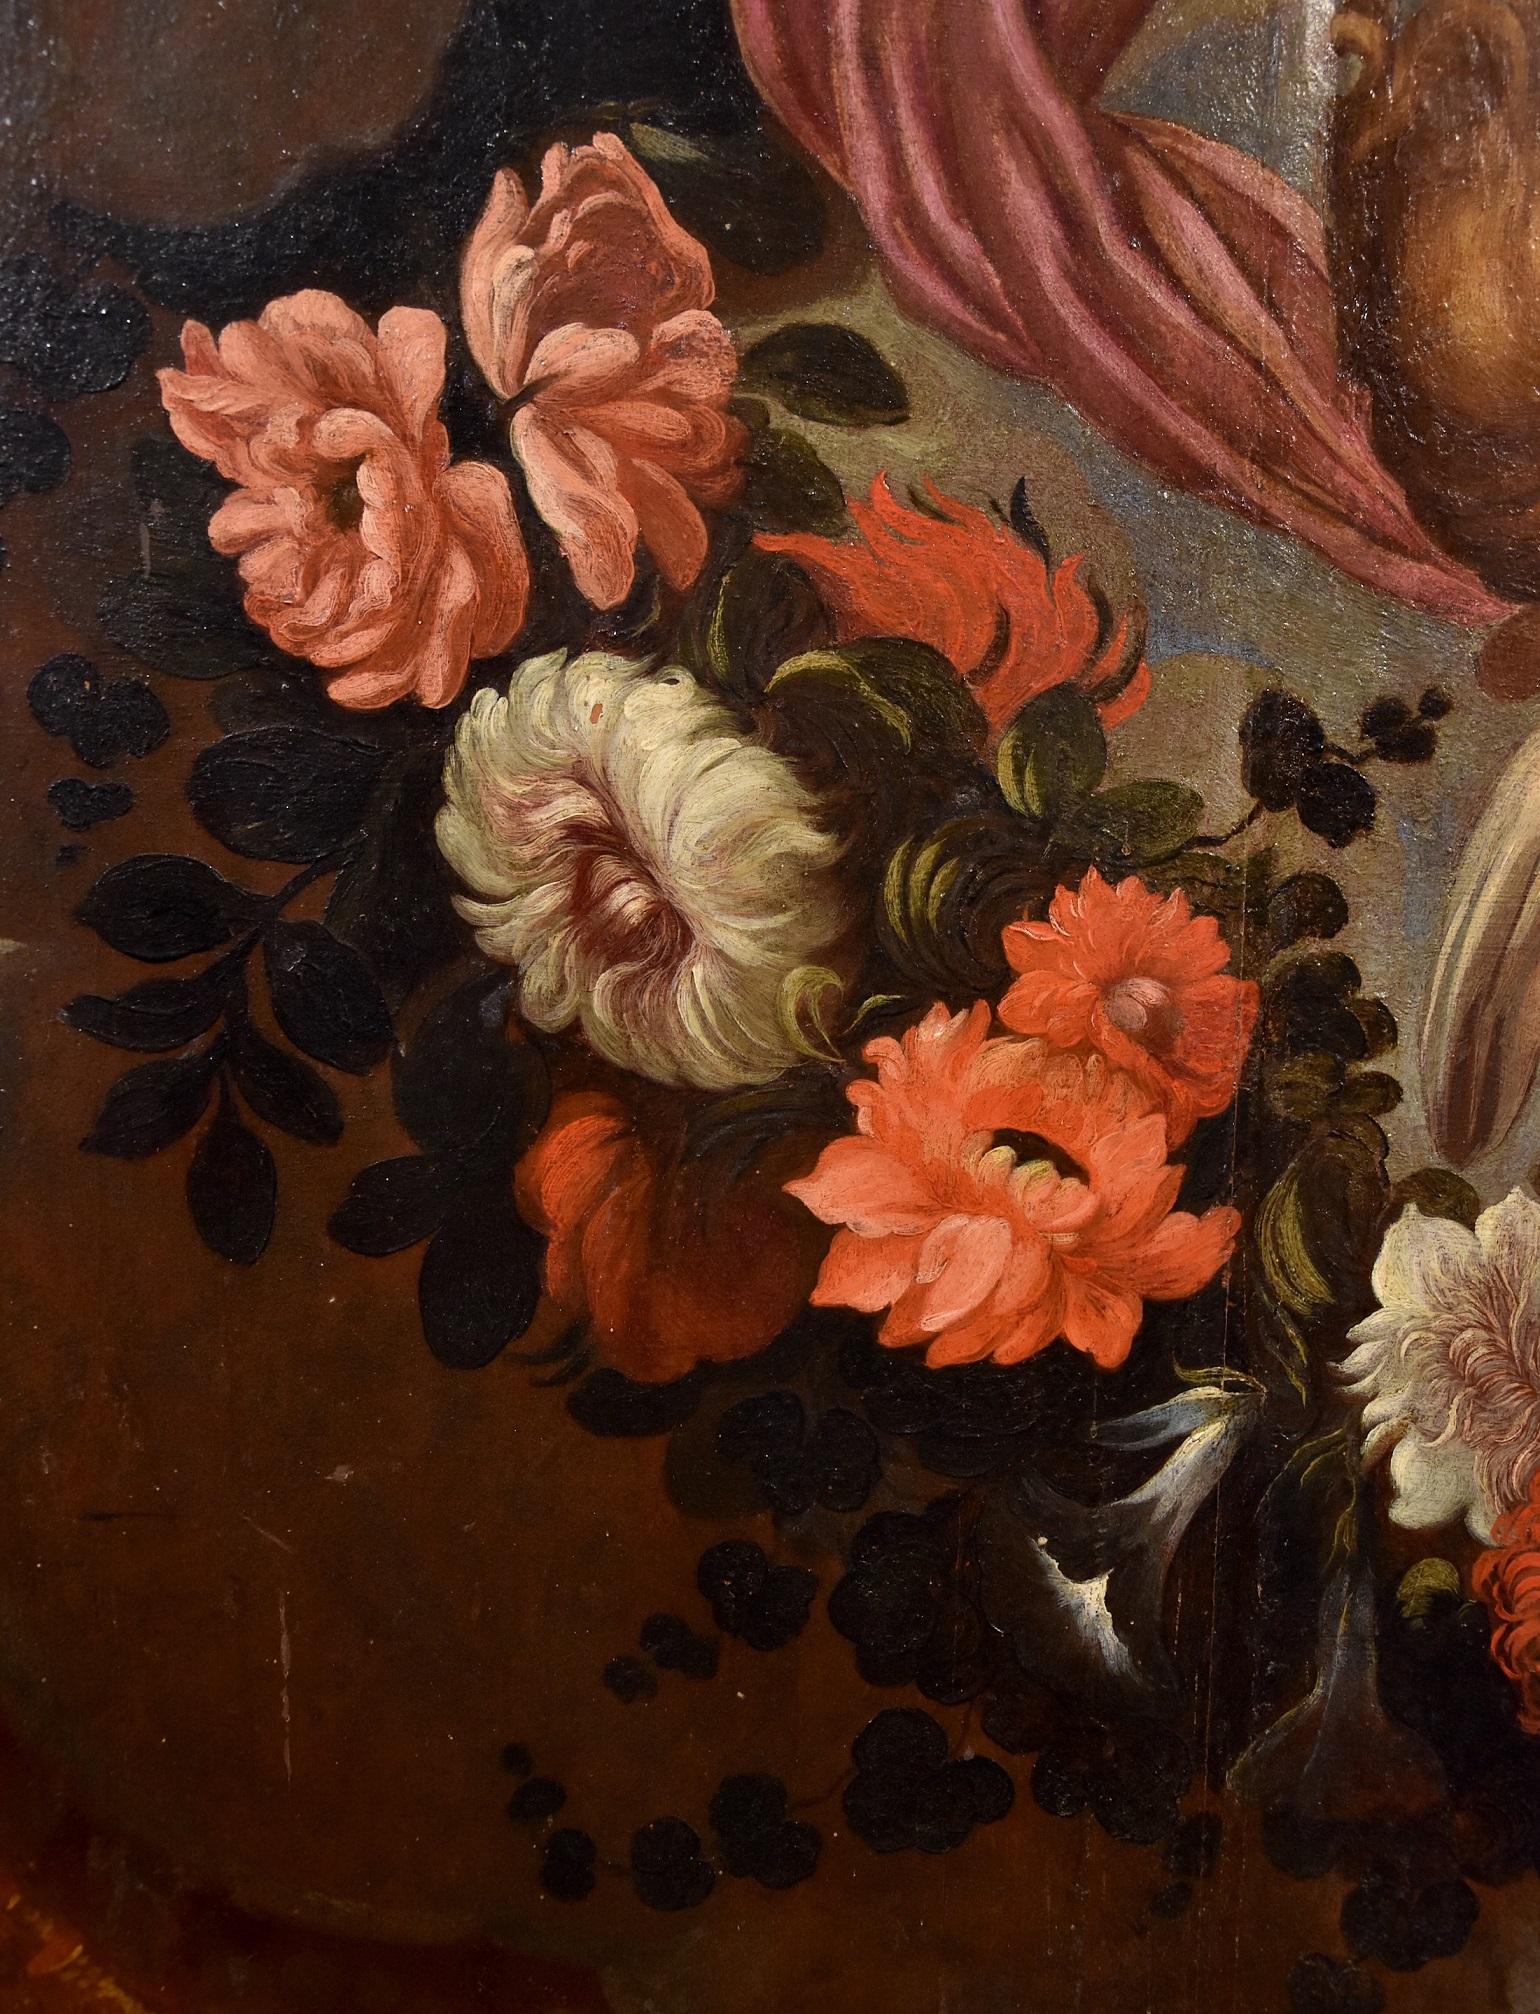 Angels Floral Garland Maratta Paint Oil on table Old master 17th Century Italian For Sale 5